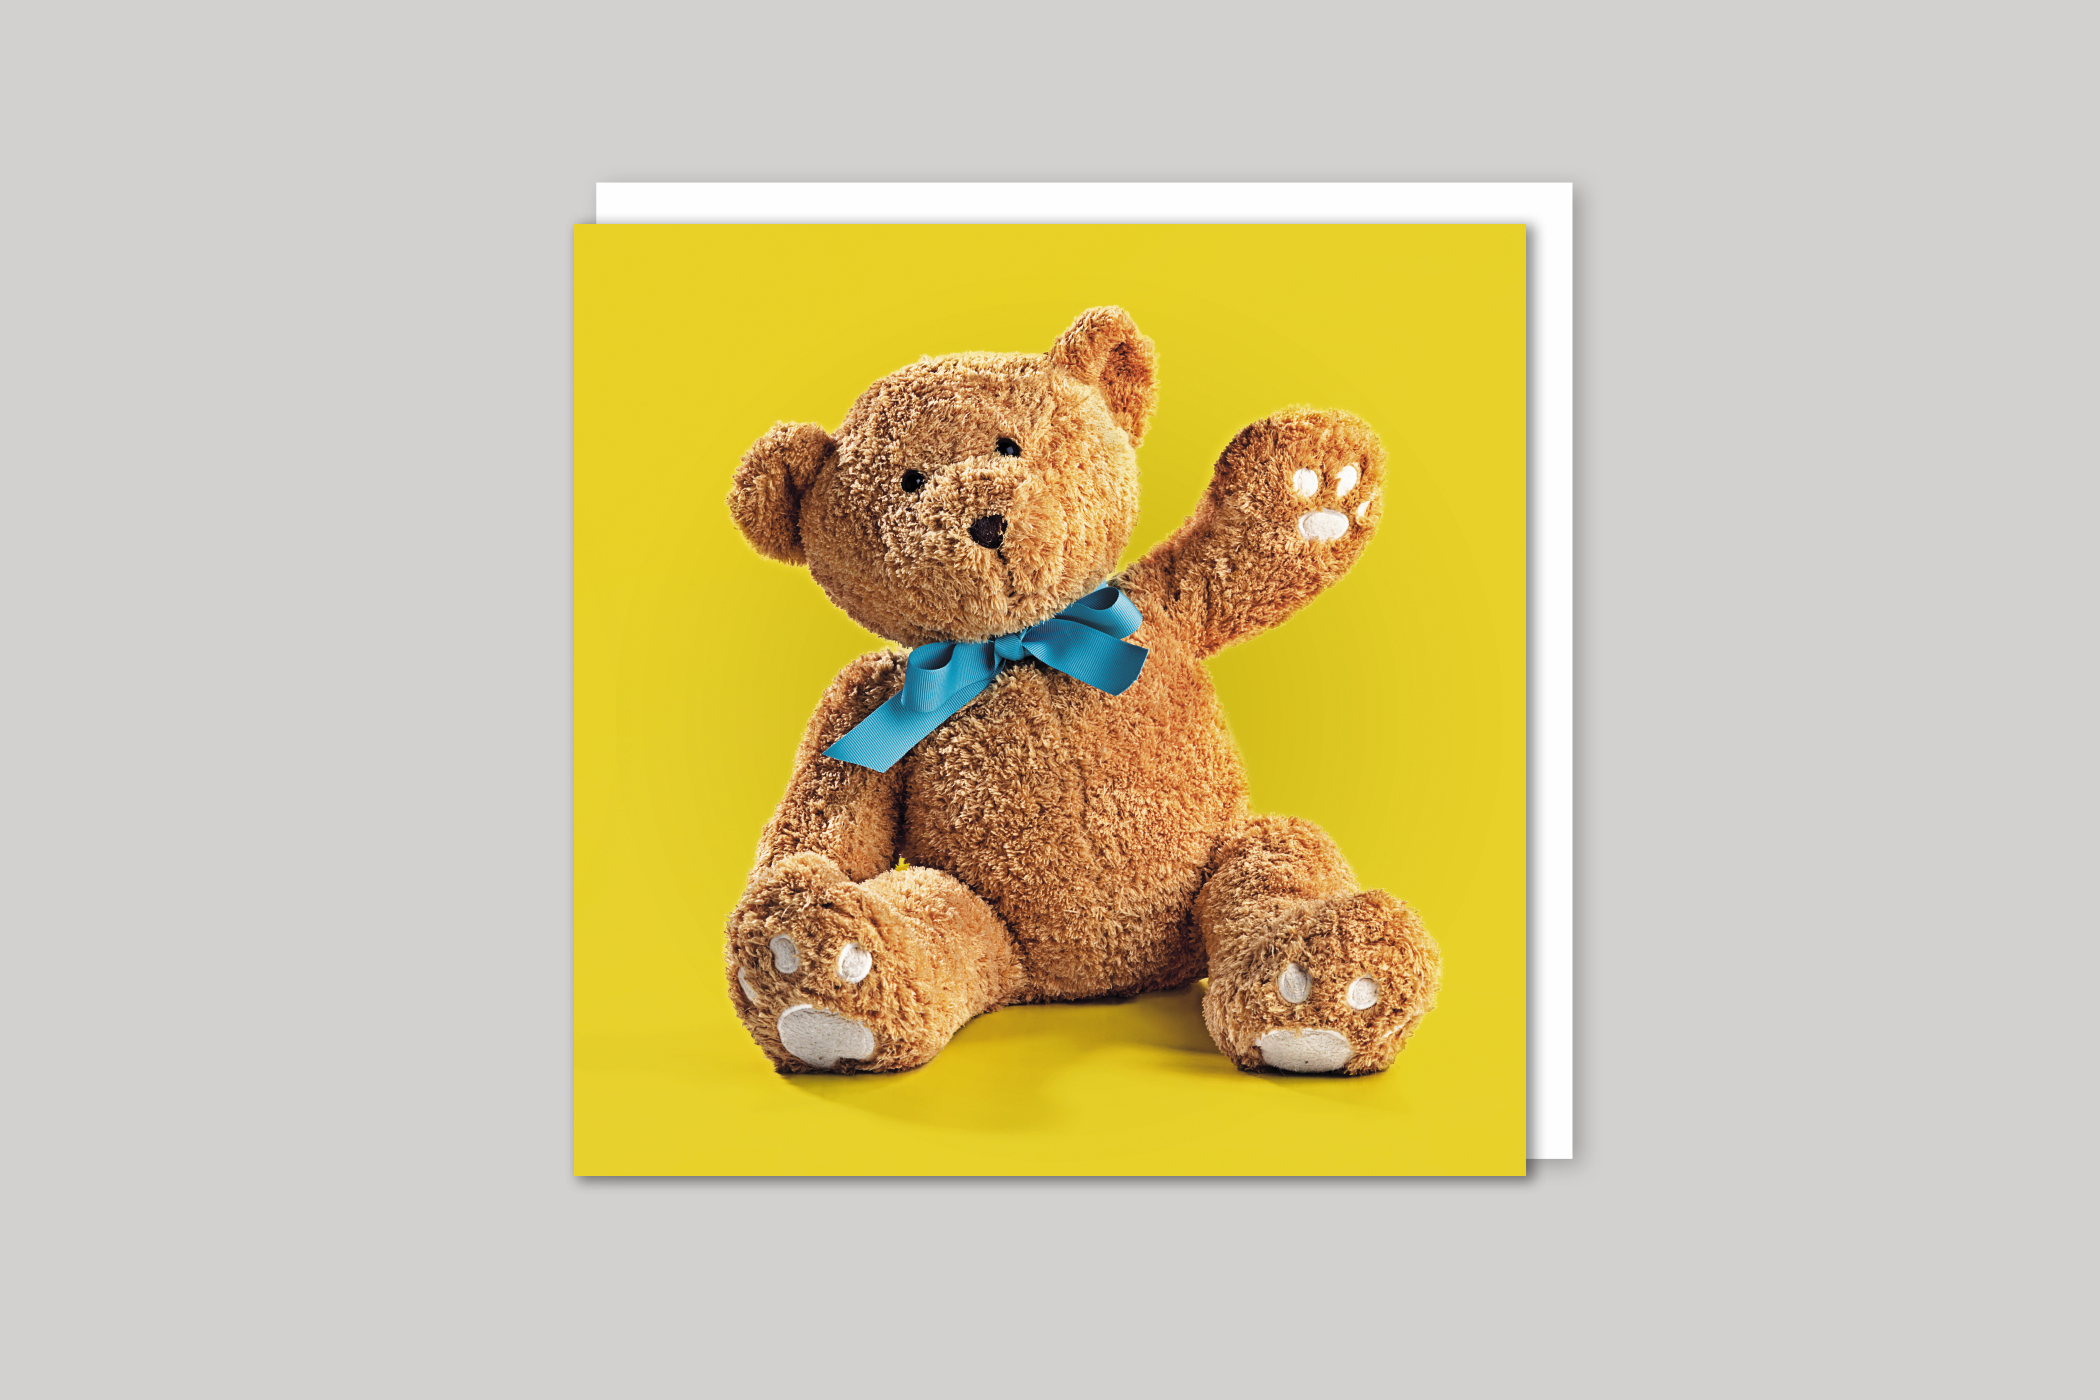 Big Ted from Exposure range of photographic cards by Icon, back page.